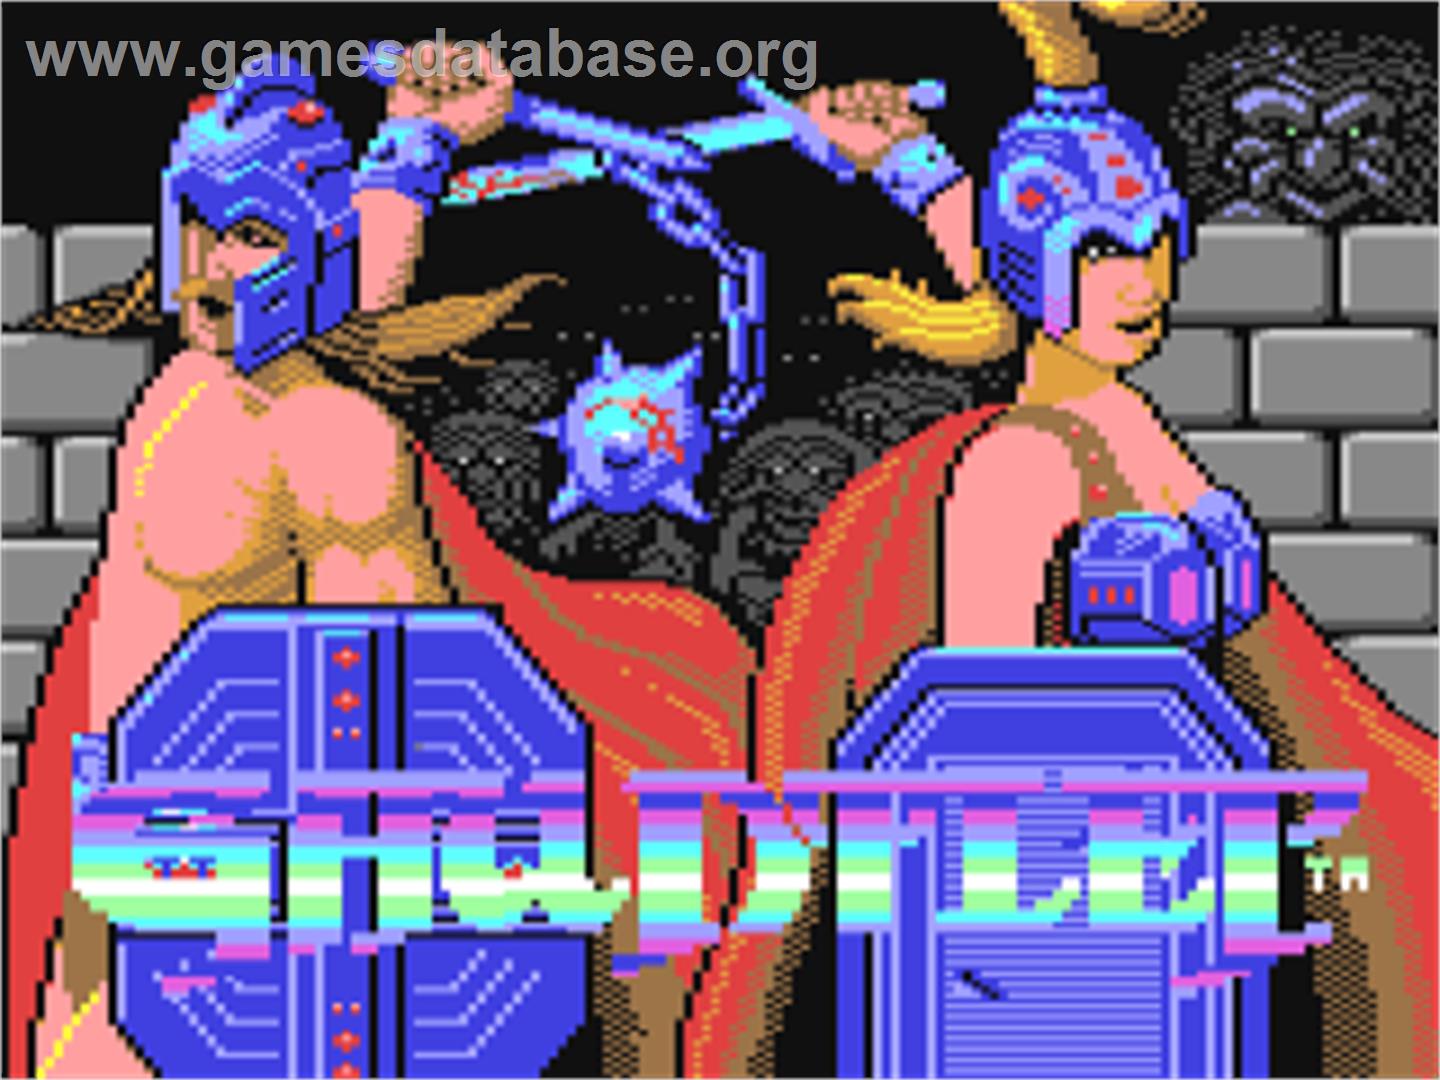 Gauntlet: The Deeper Dungeons - Commodore 64 - Artwork - Title Screen